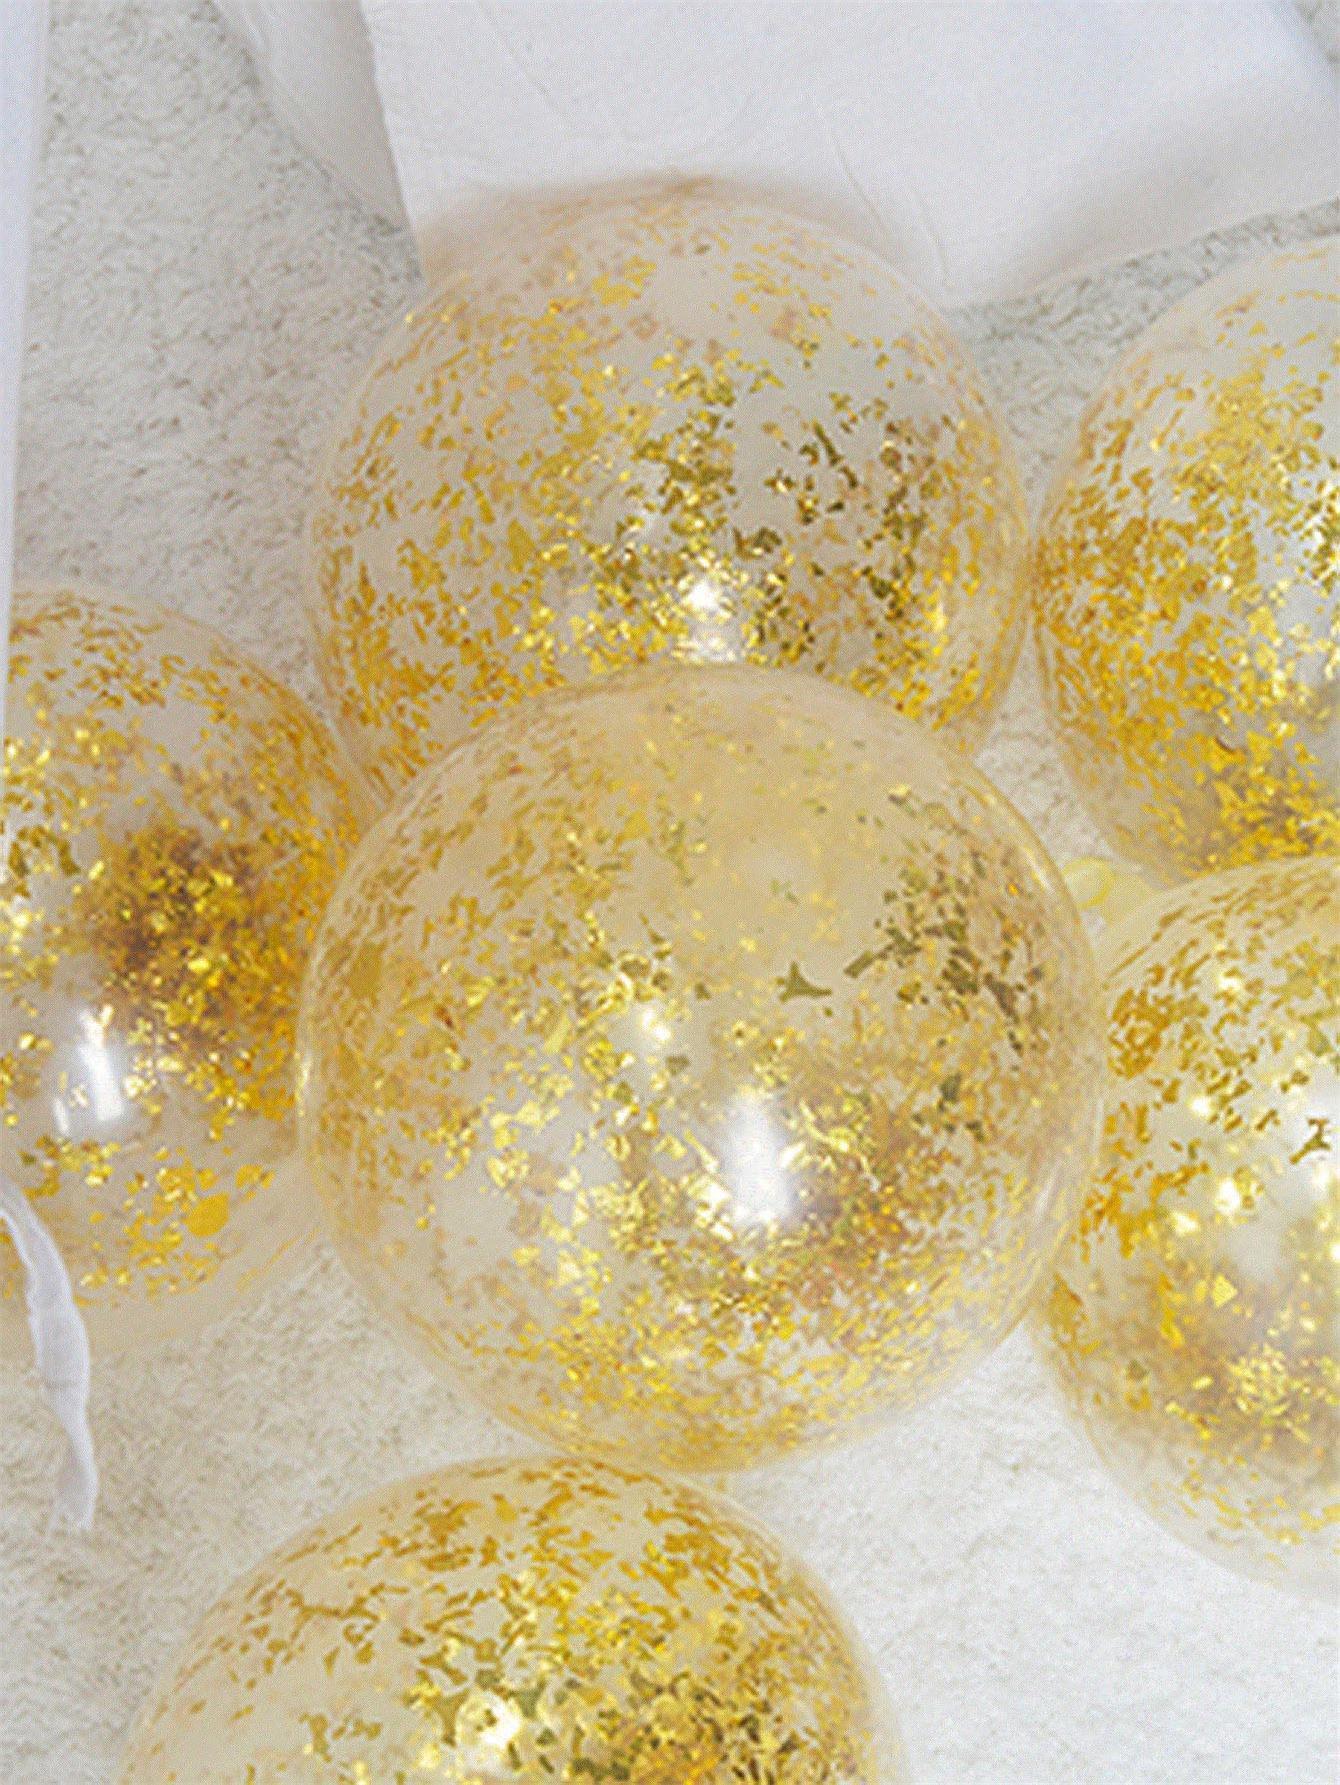 🔥Factory overstock - 10pcs Confetti Balloon, Metallic Gold Decorative Latex Balloon, For Party Decoration Wedding Decoration, And Proposal